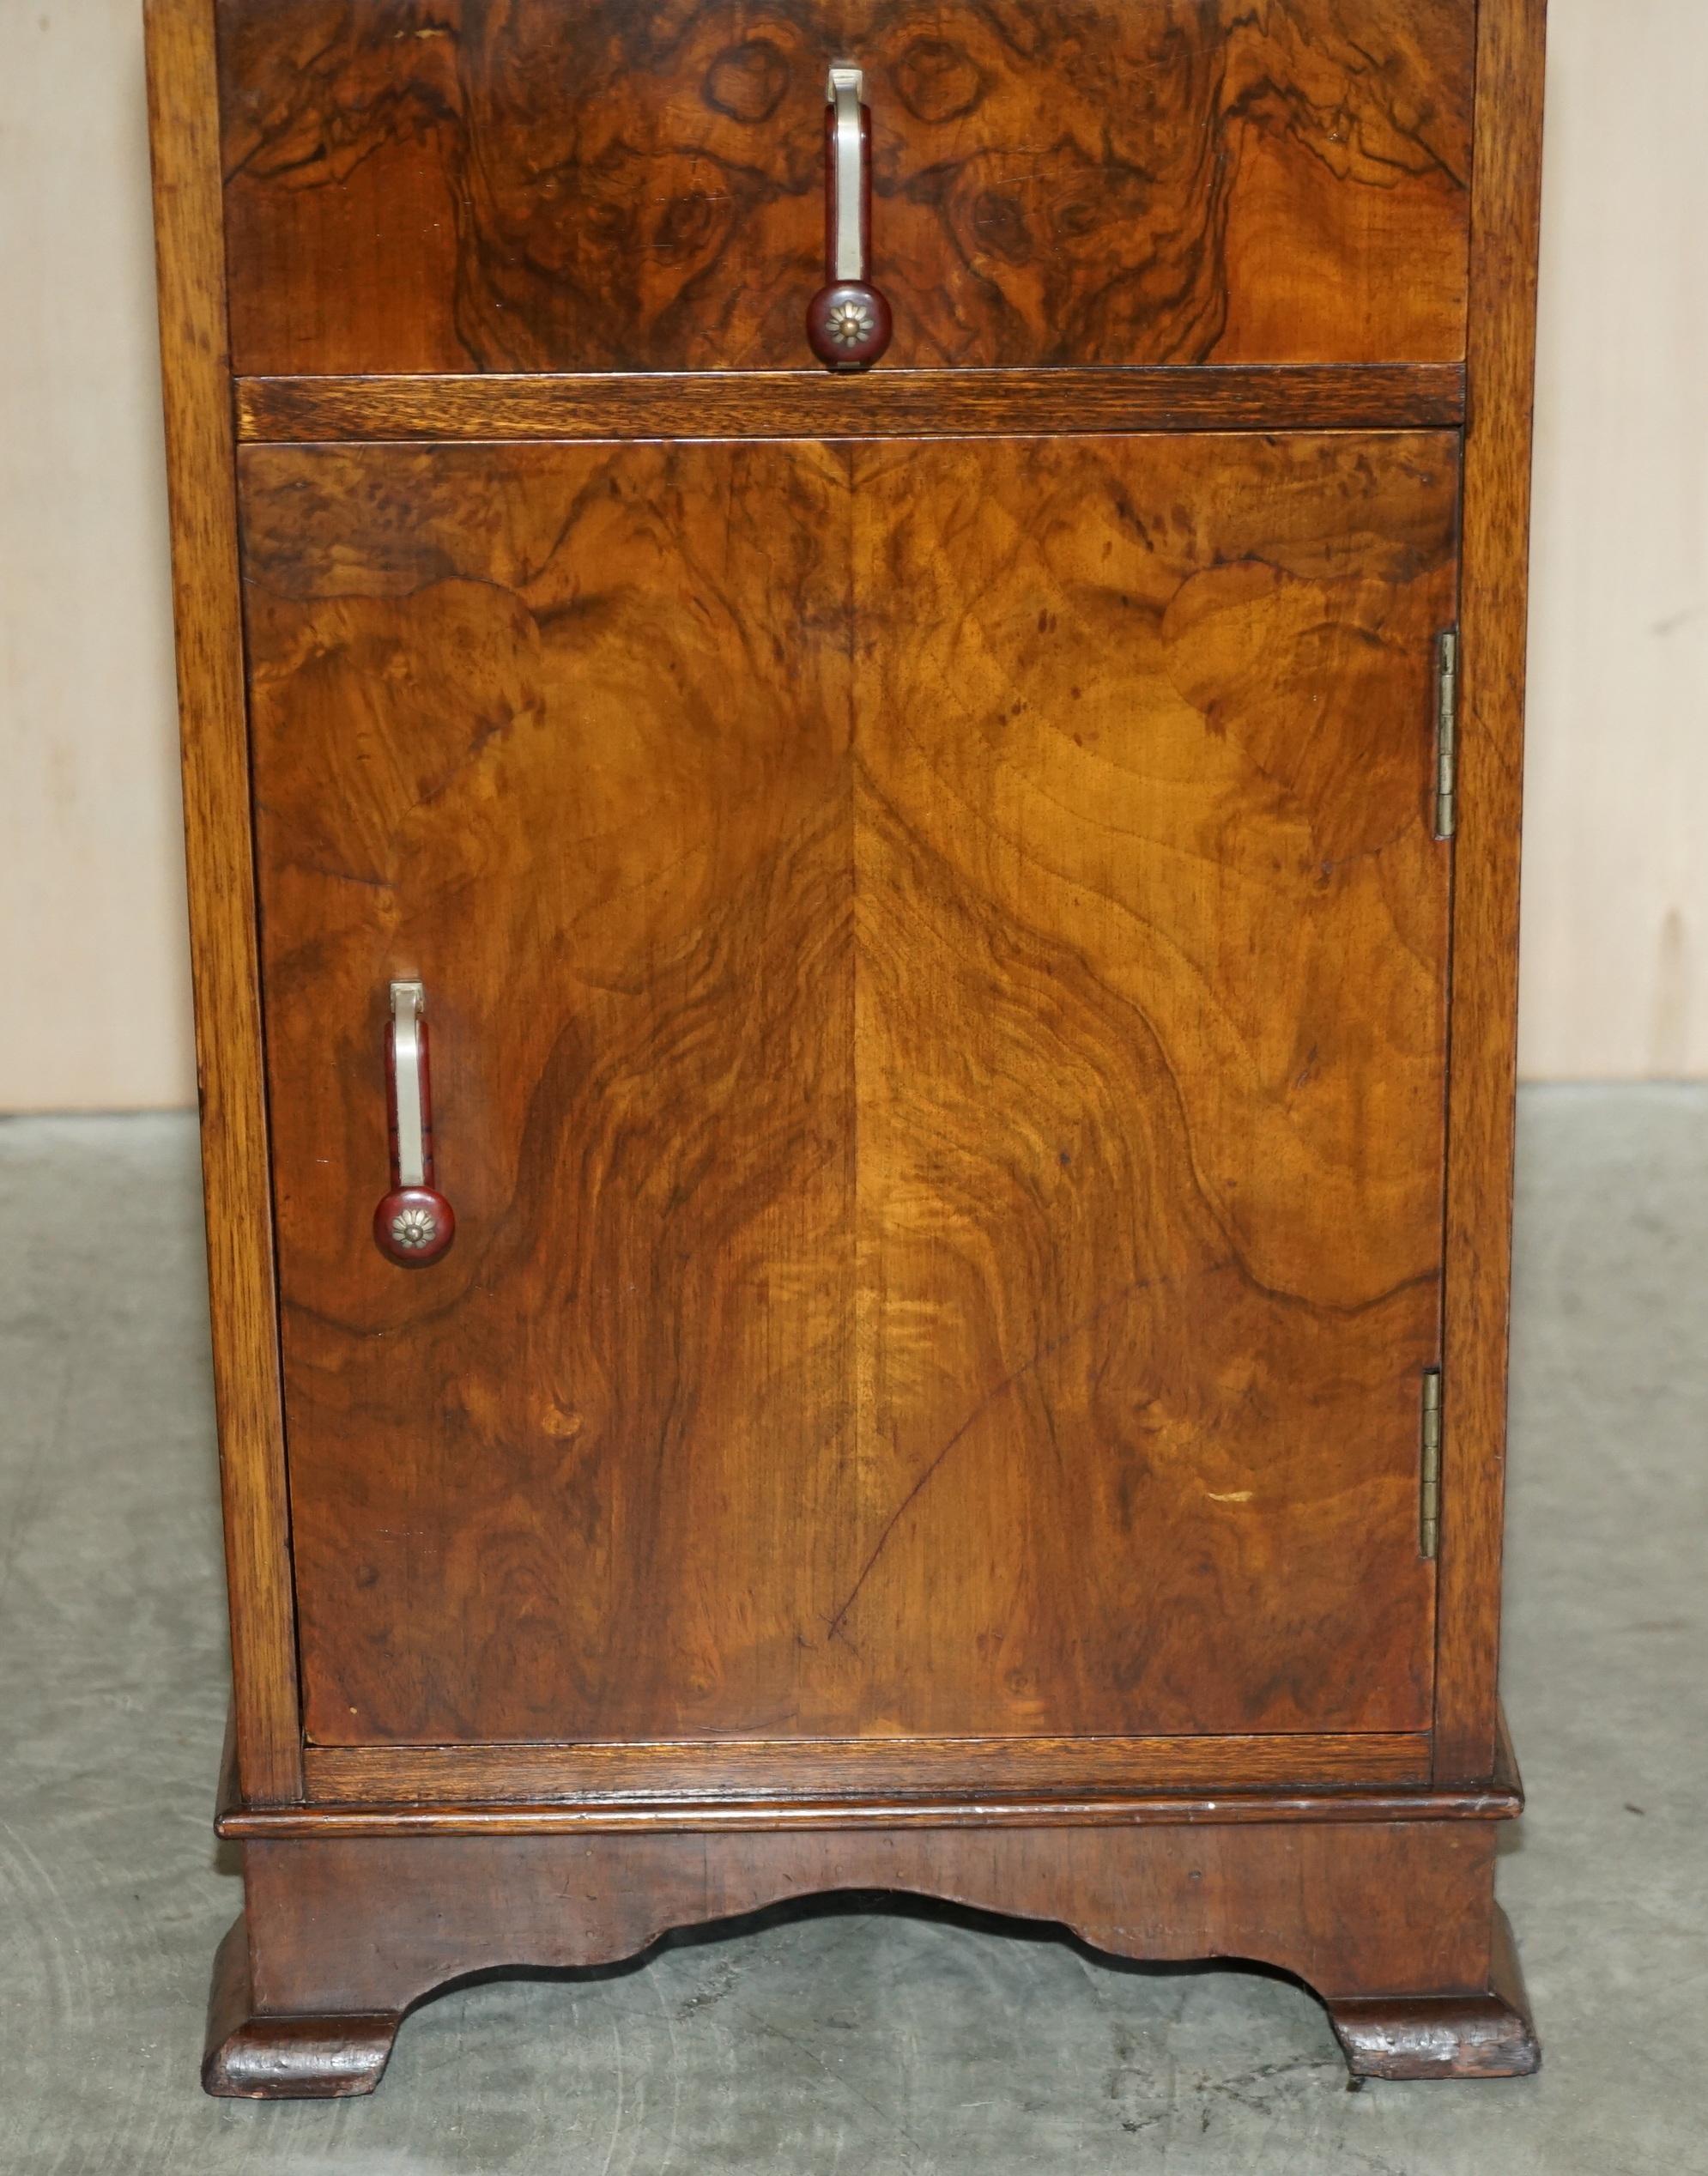 Hand-Crafted Antique Art Deco Burr Walnut Bedside Table with Single Drawer Part of Suite